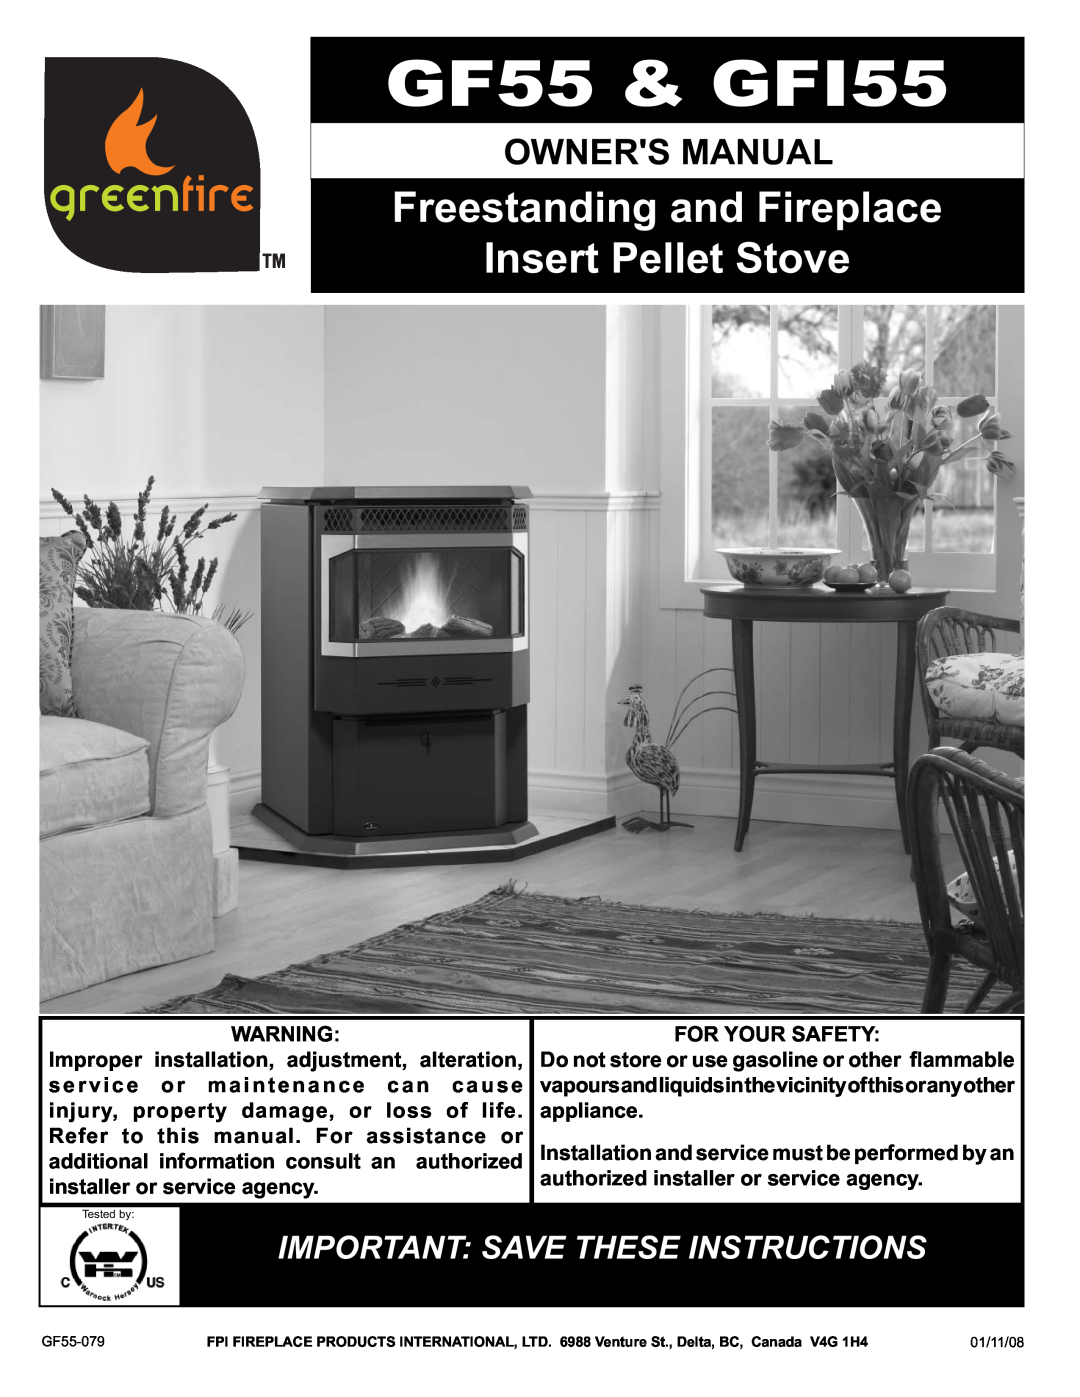 FMI owner manual GF55 & GFI55, Freestanding and Fireplace Insert Pellet Stove, Important Save These Instructions 